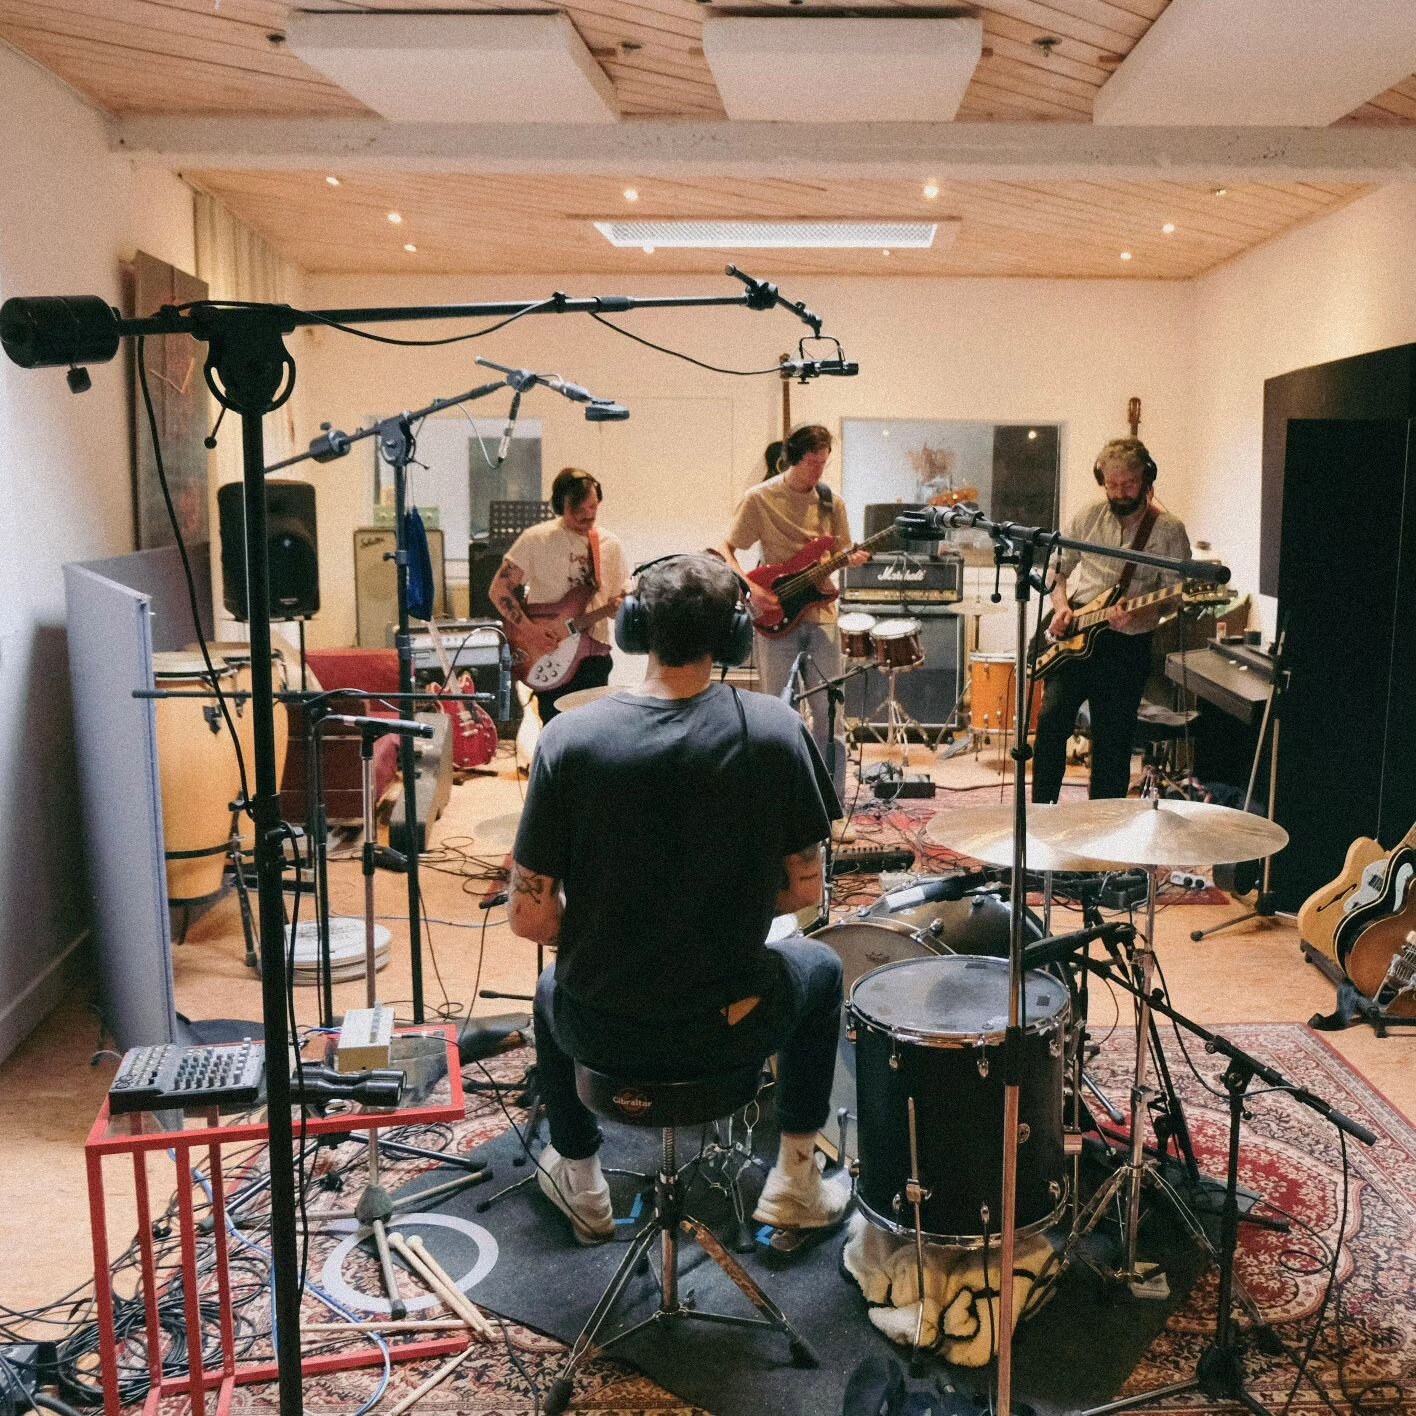 We've been recording an album @studioswamp and prepping hard for the semi-finals of Humo's Rock Rally at @hetdepot this friday! Can't wait to see you there and play some new songs. @humo.be